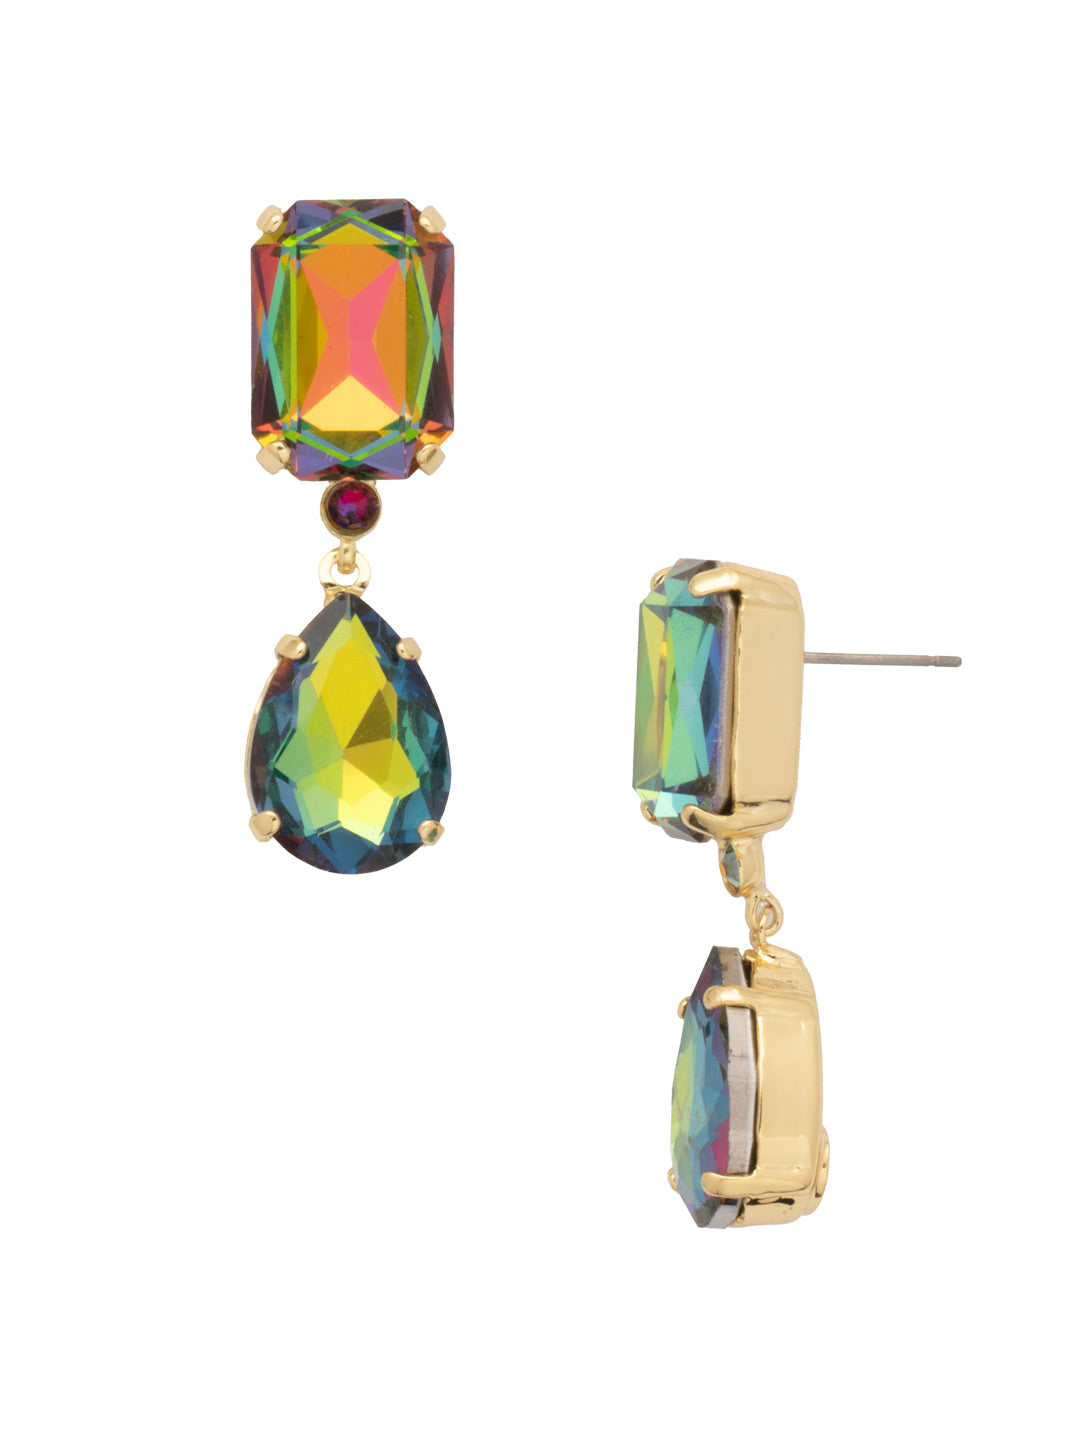 Rosetta Dangle Earrings - EEP49BGVO - <p>The Rosetta Dangle Earrings are ready for their time in the spotlight. Add them to your evening outfit and let the cushion octagon and pear crystals shine. From Sorrelli's Volcano collection in our Bright Gold-tone finish.</p>